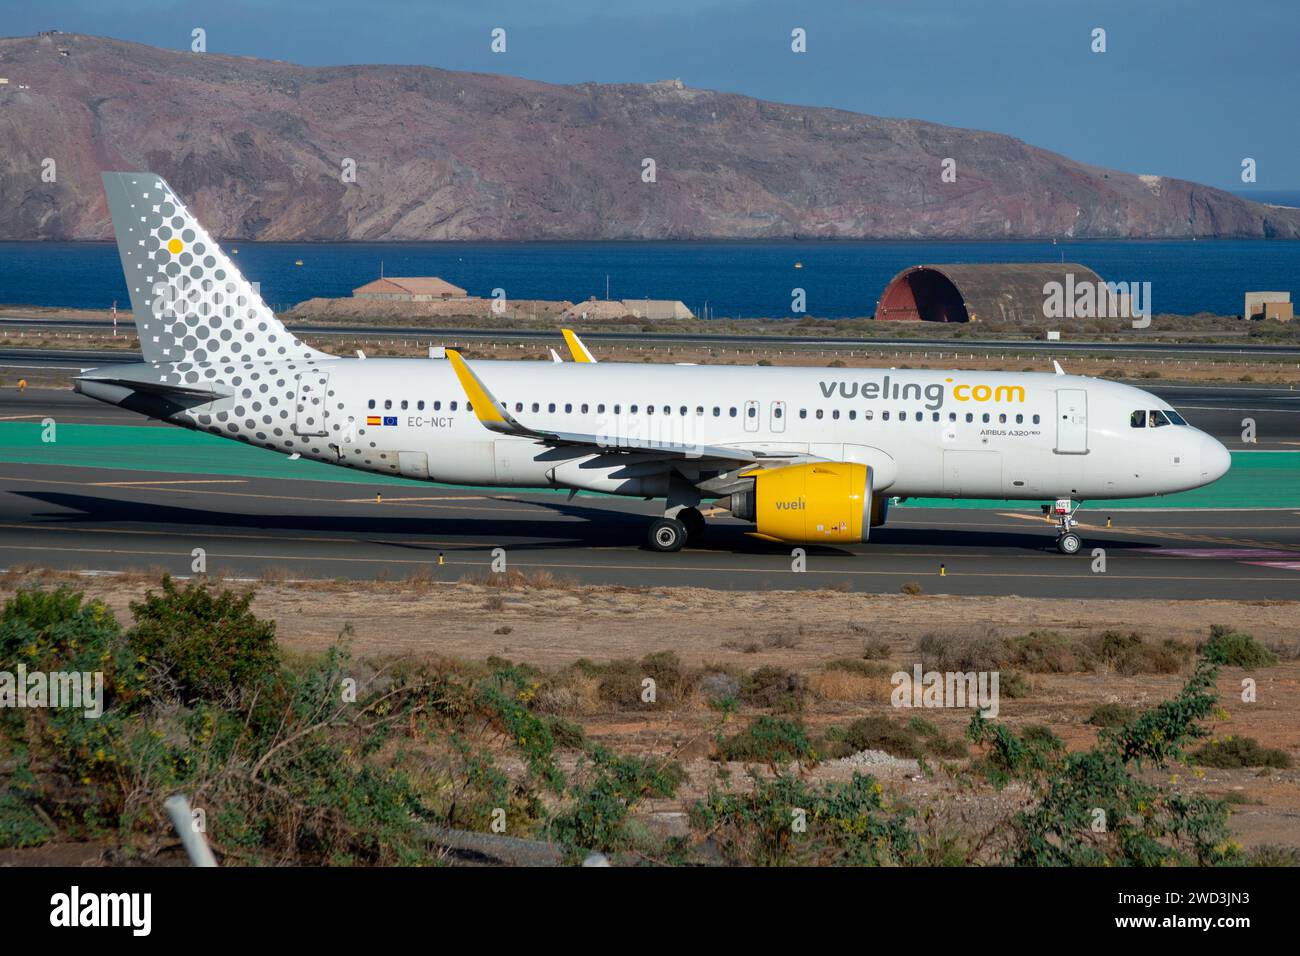 Airbus A320 neo airliner of the Vueling airline at the Gran Canaria airport Stock Photo